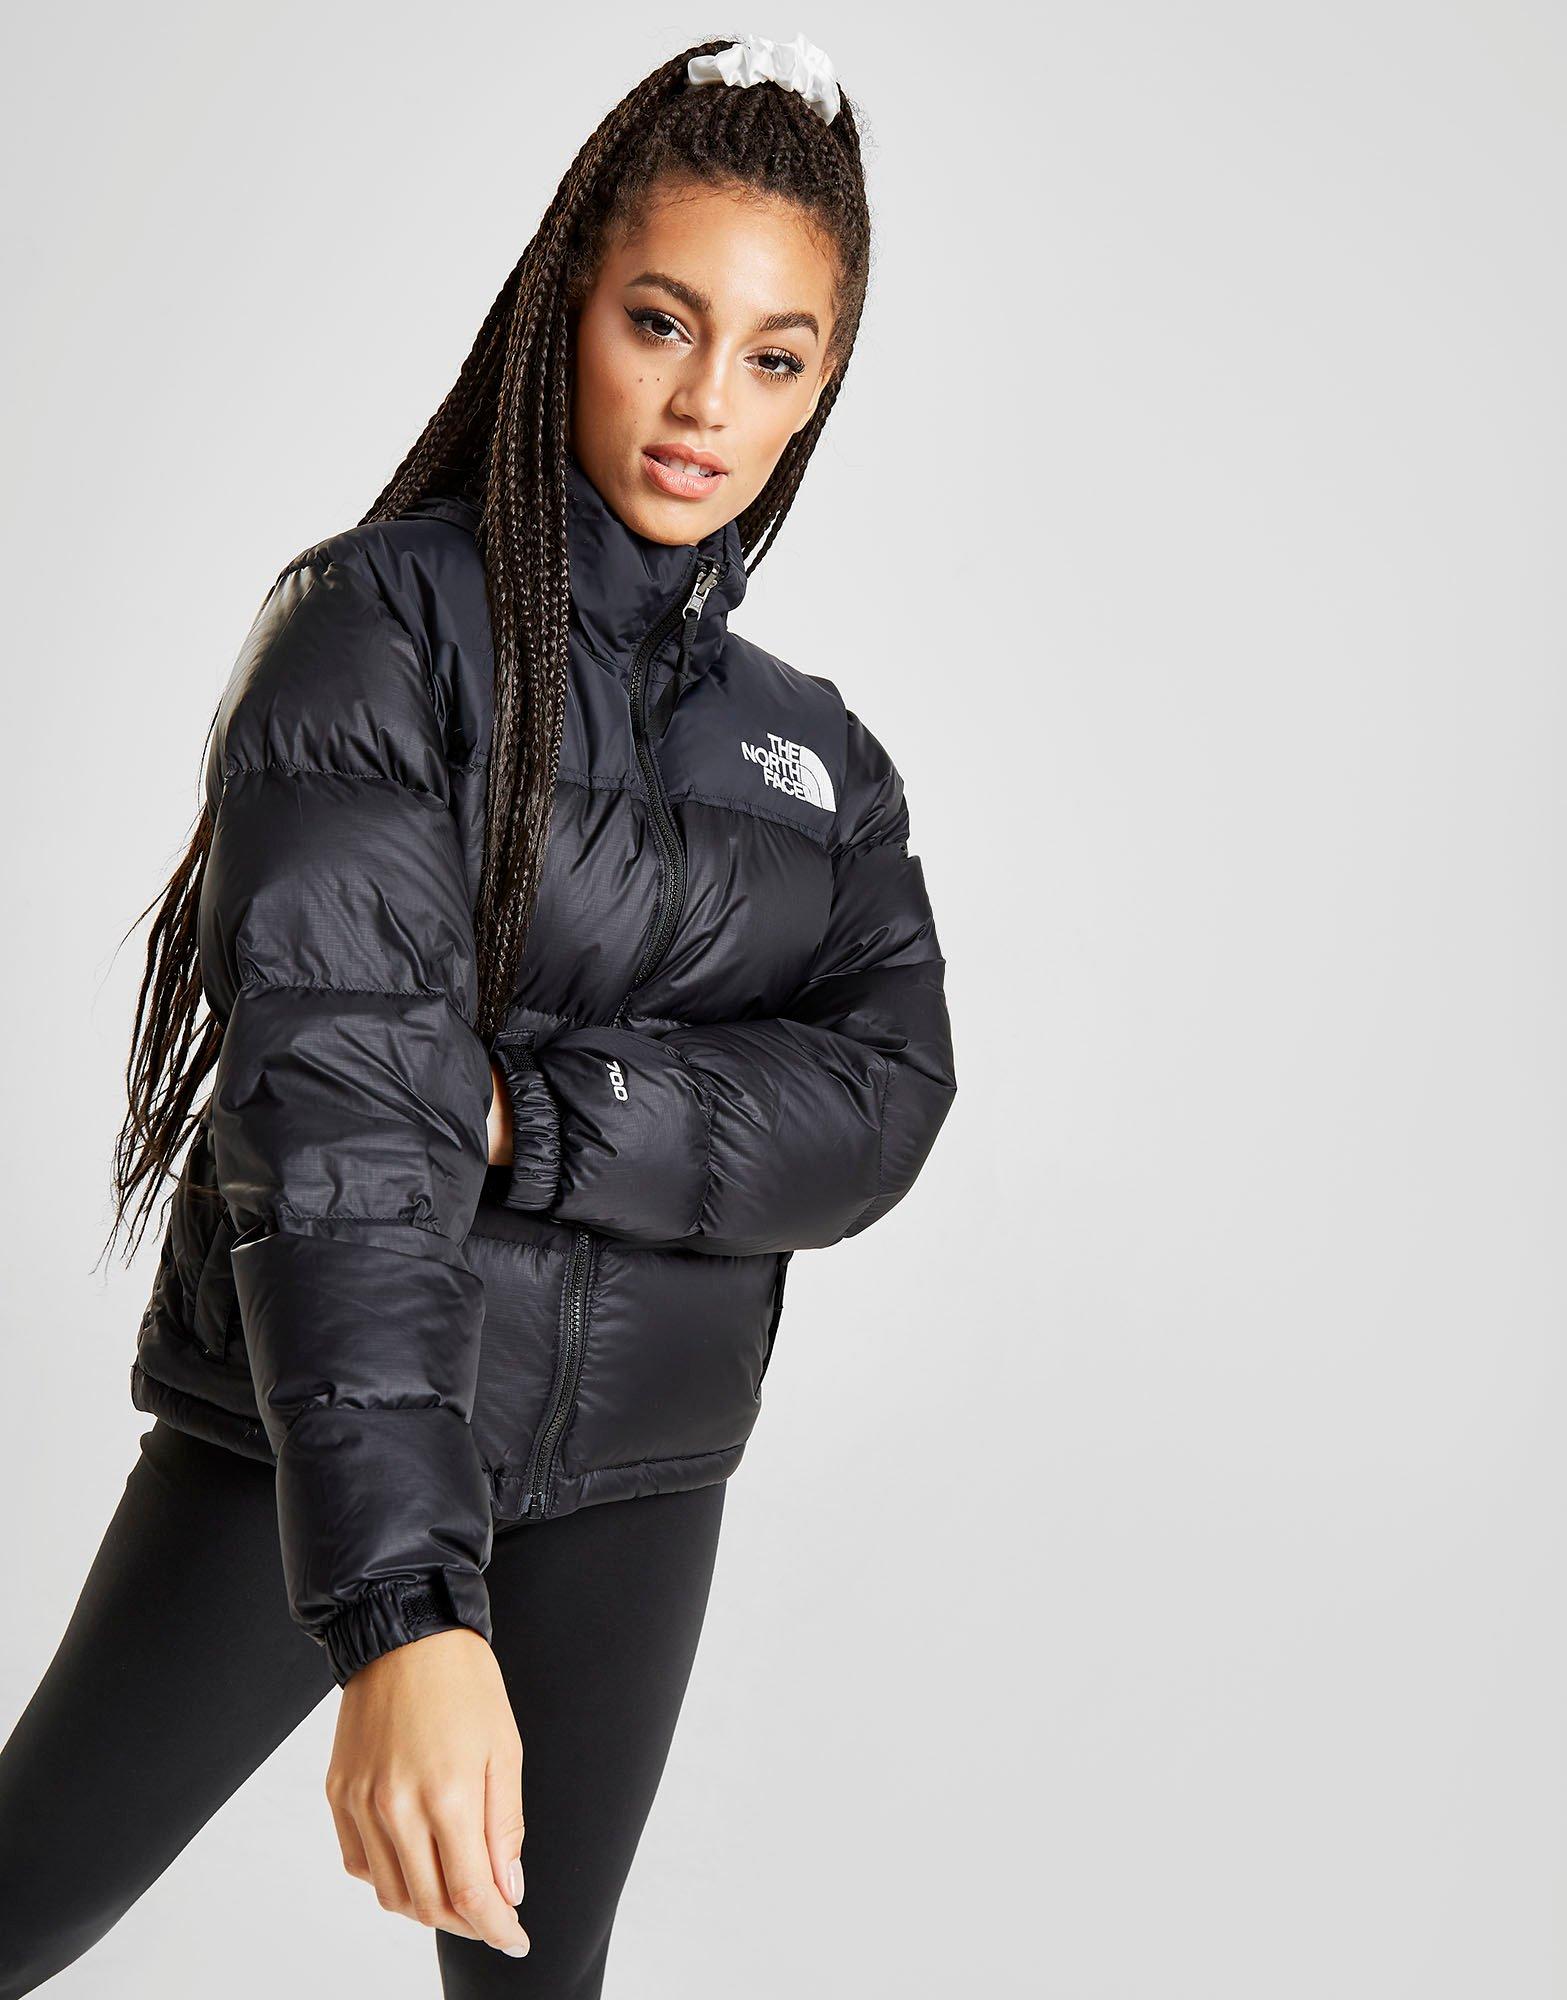 north face puffer jd